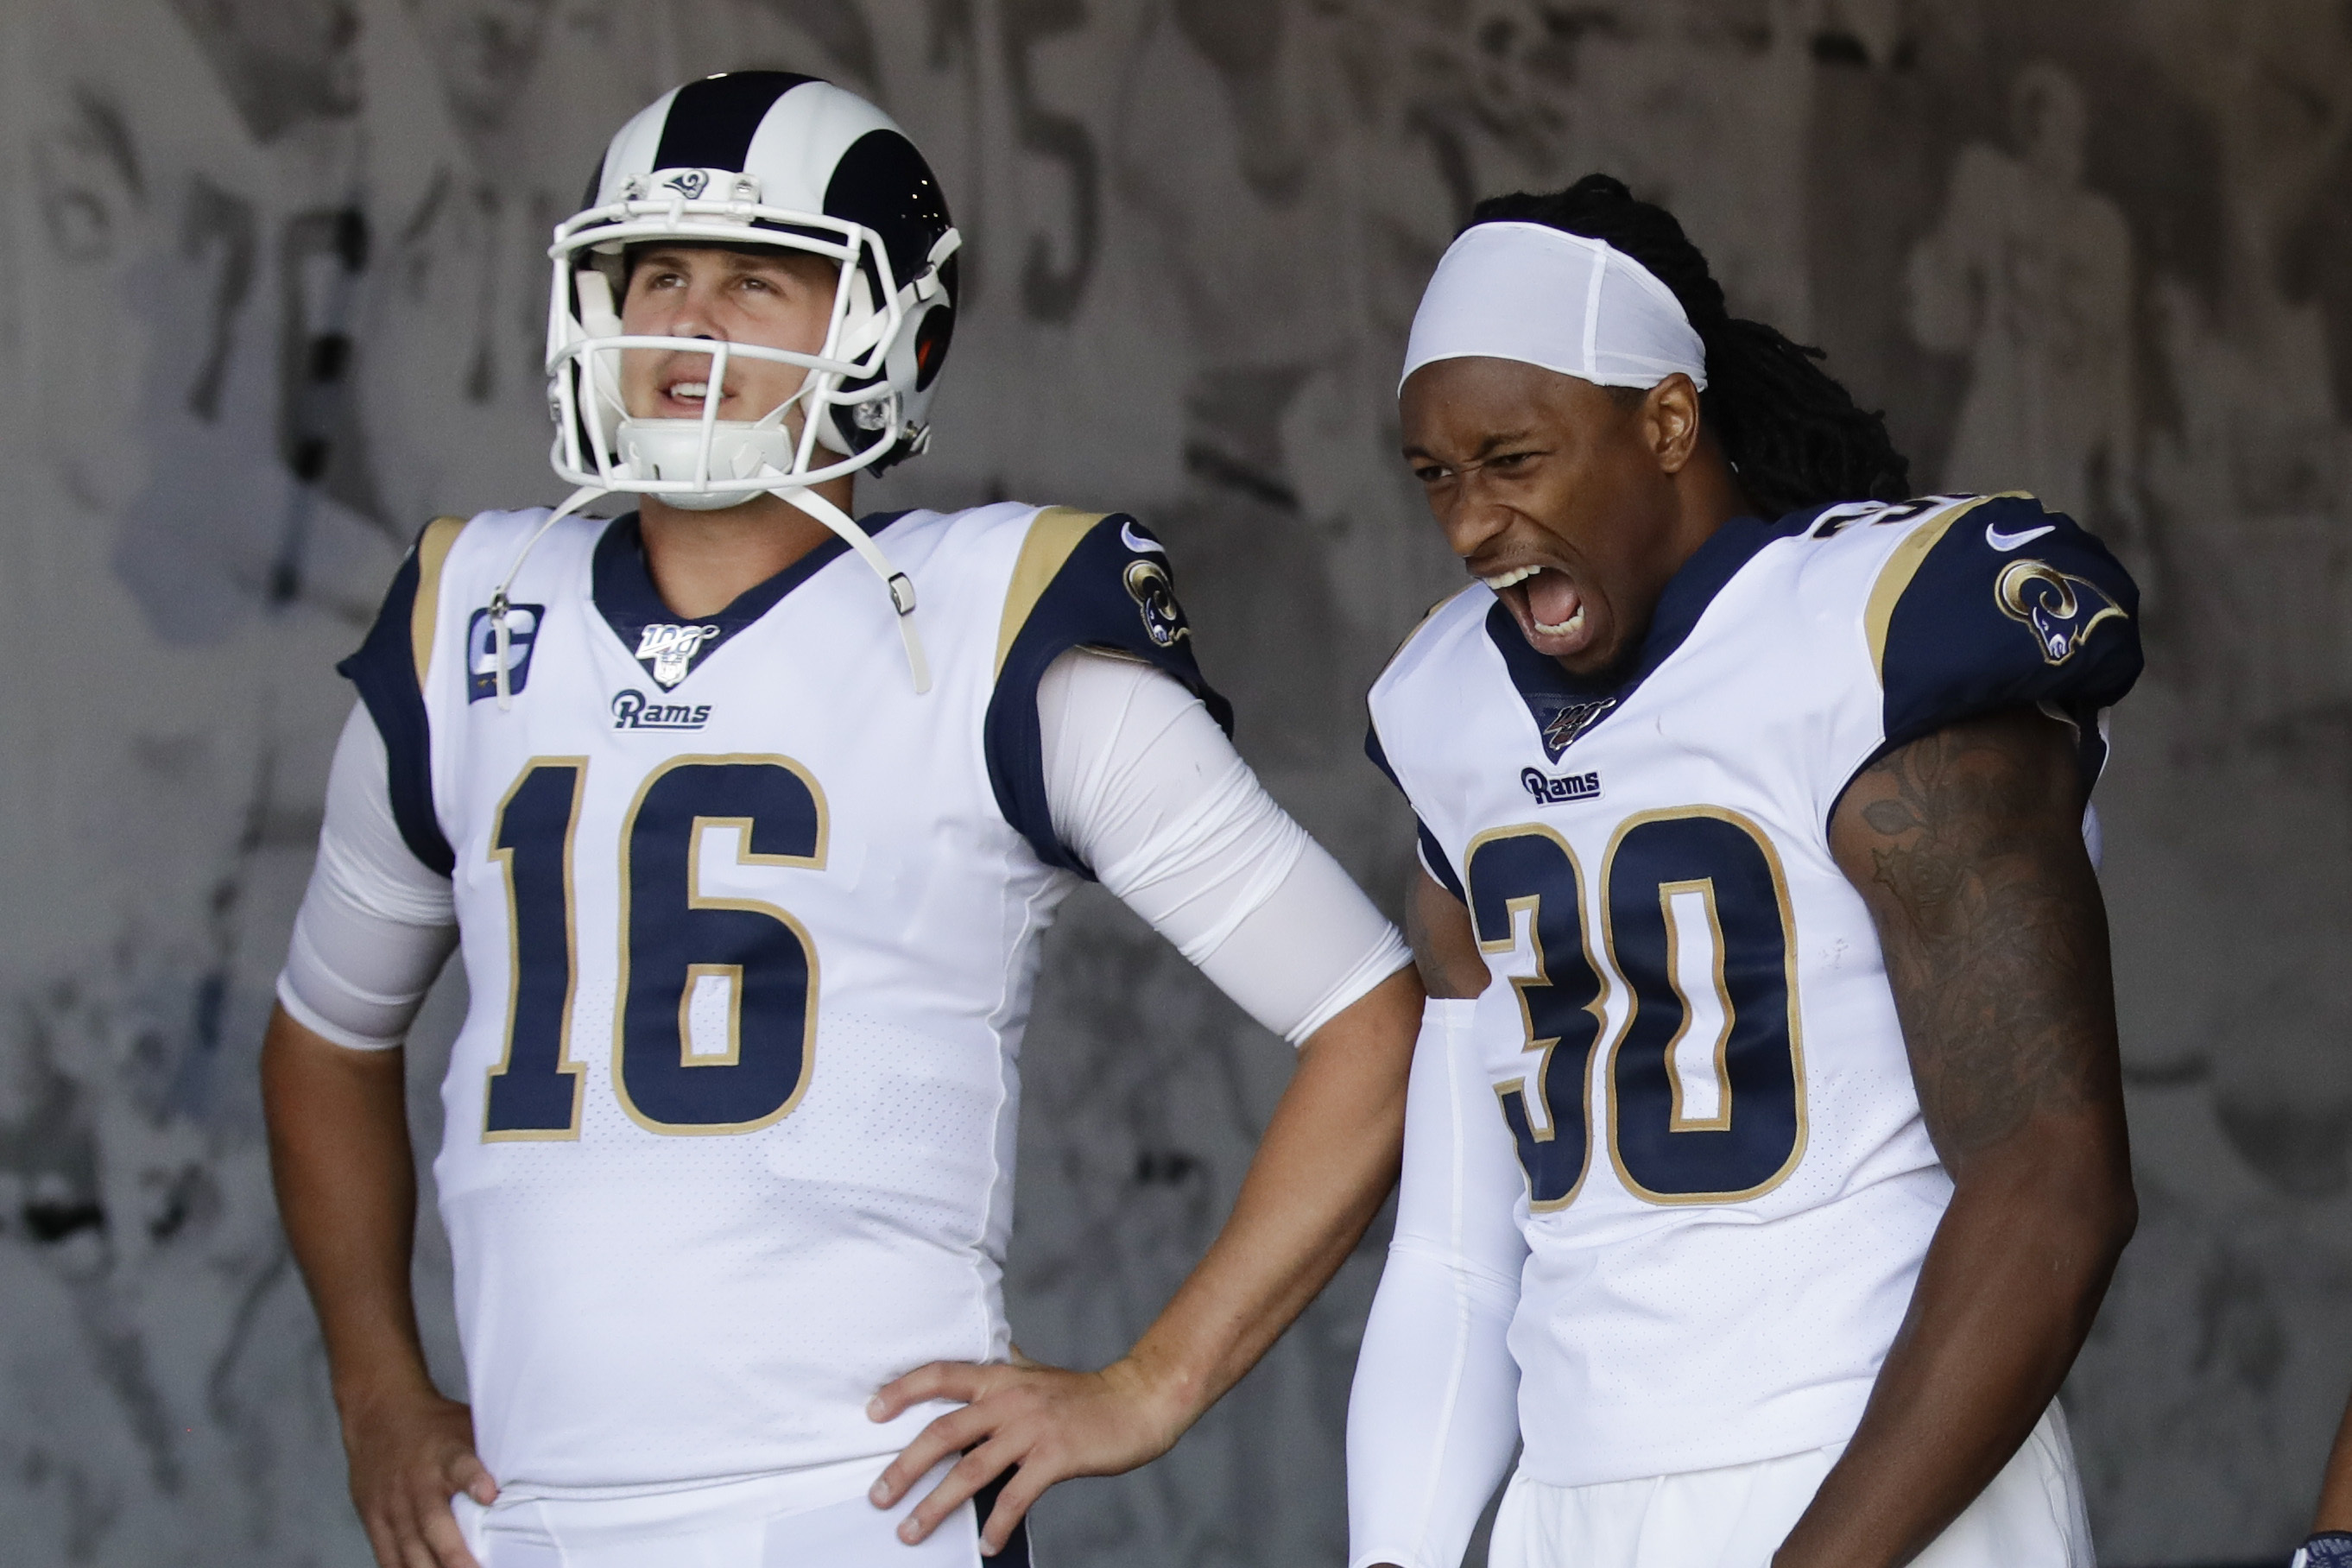 Todd Gurley has given the Rams plenty of reasons to keep giving